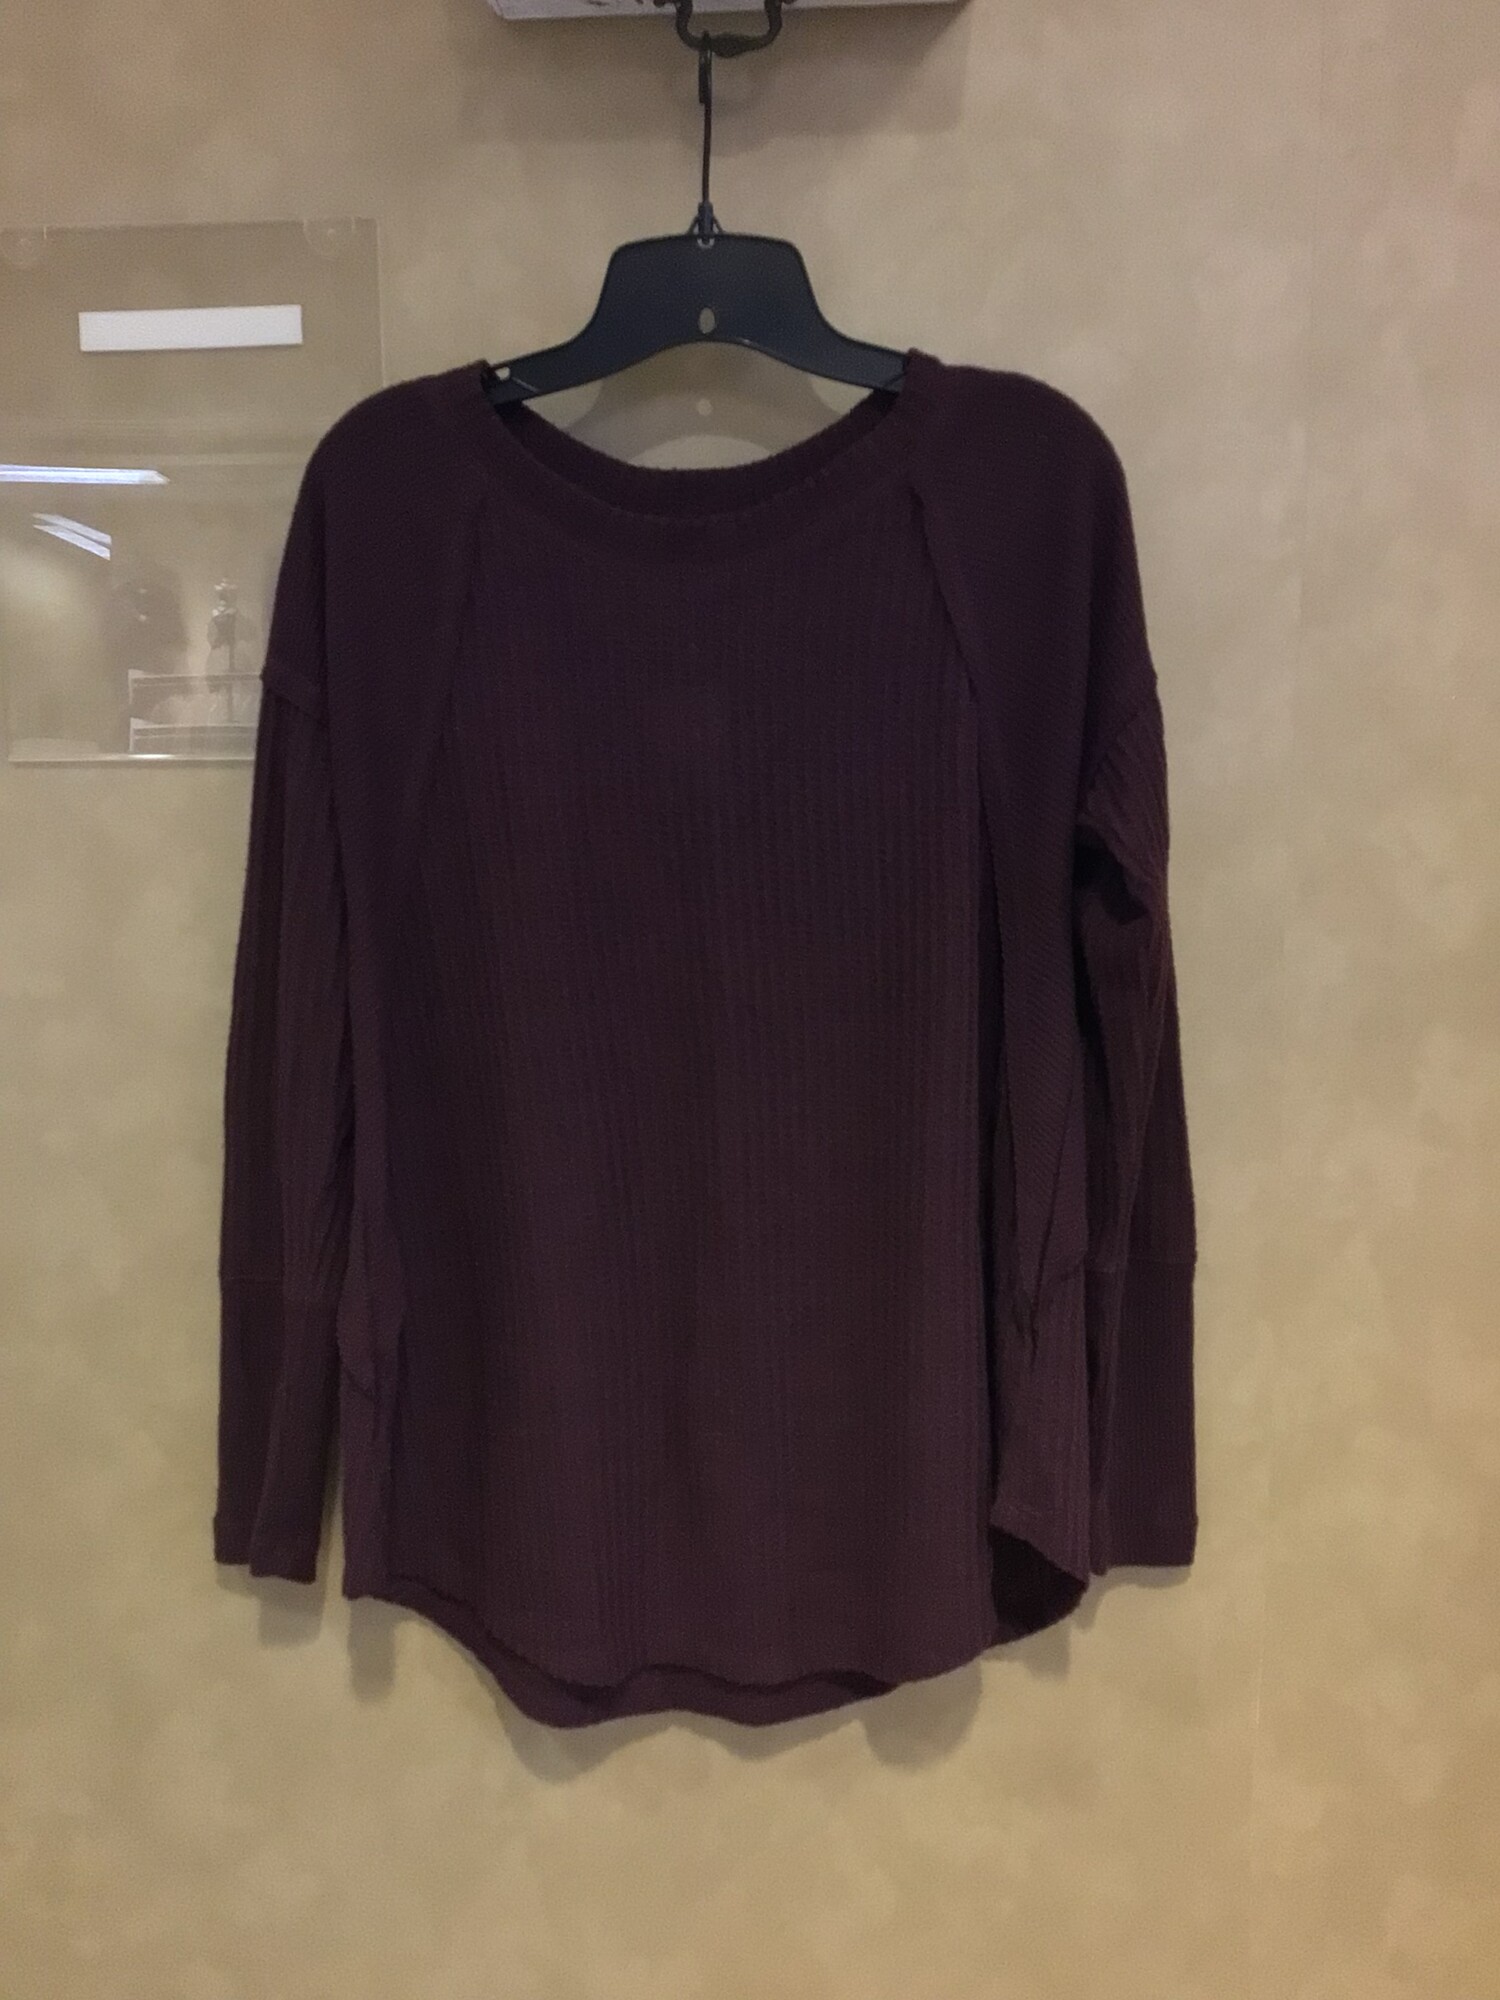 Maurices, Plum, Size: S